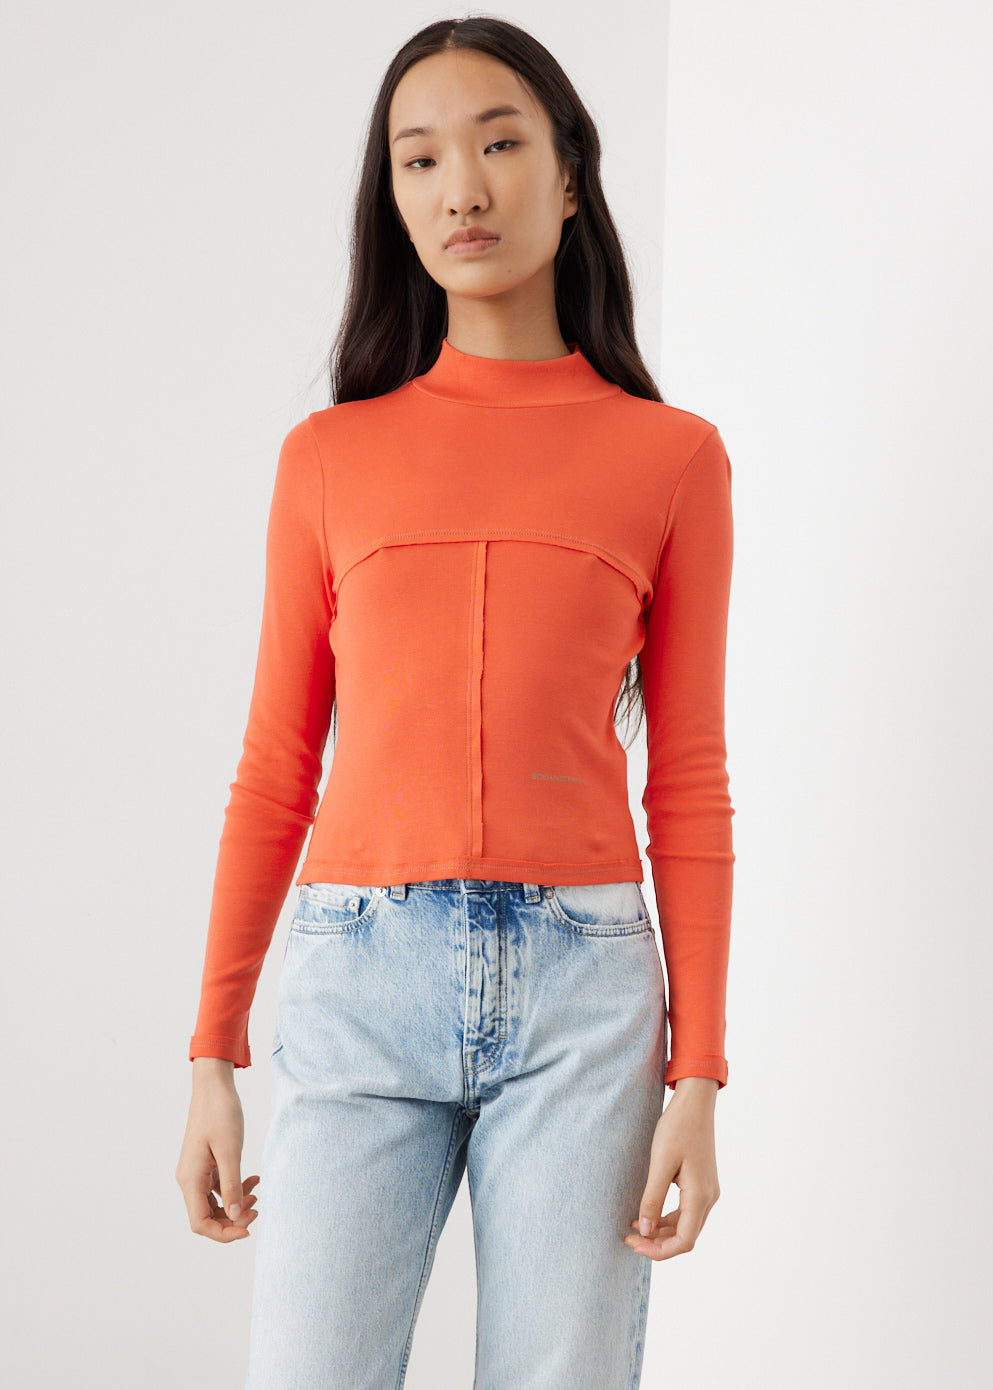 Lapped Baby Long Sleeve Top